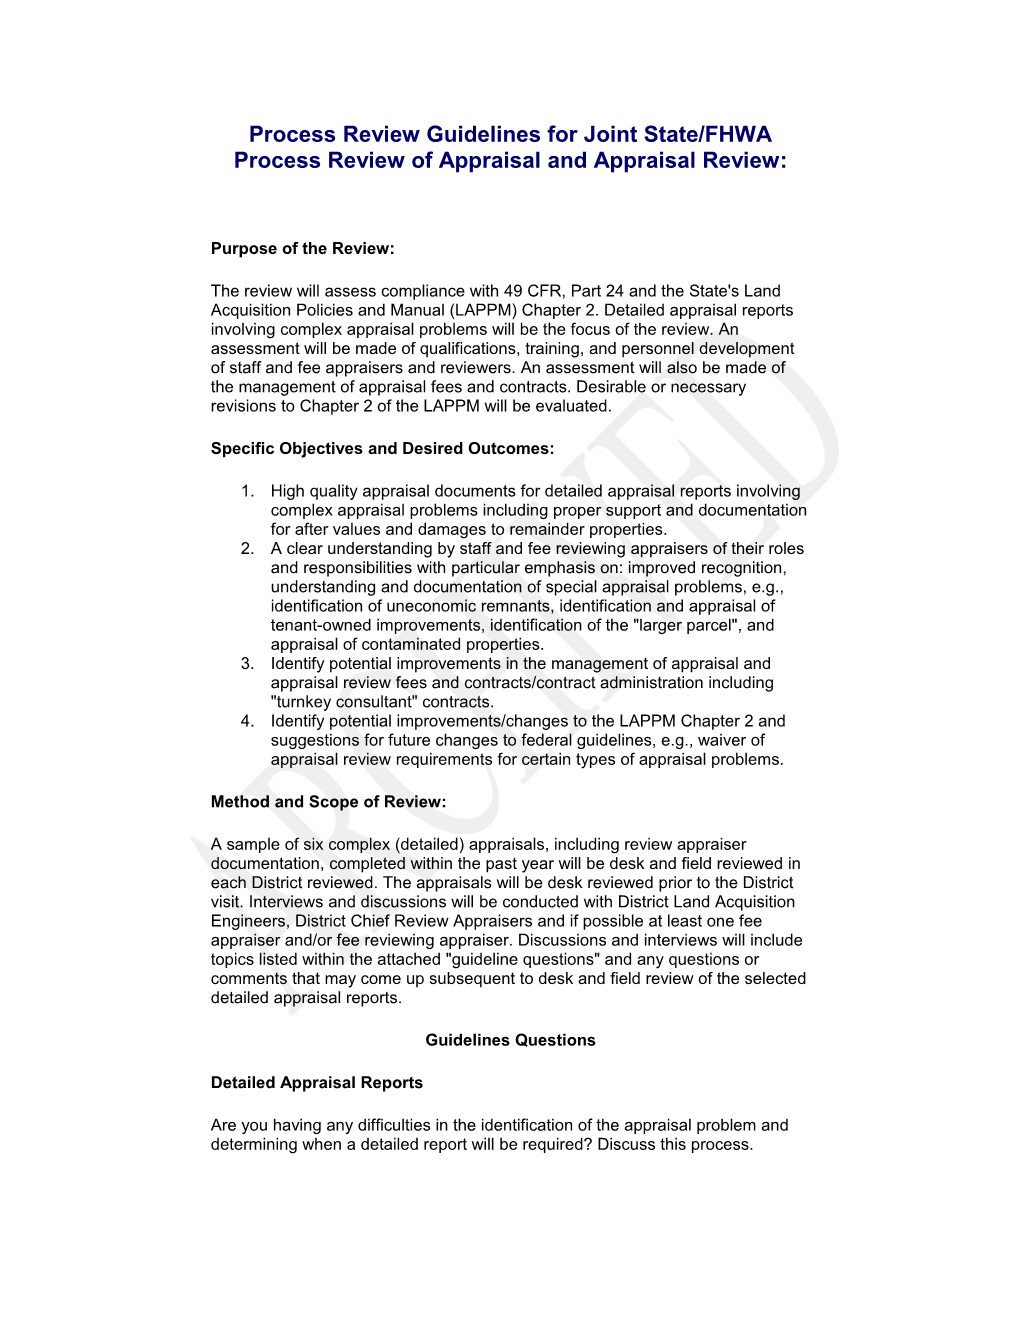 Process Review Guidelines for Joint State/FHWA Process Review of Appraisal and Appraisal Review